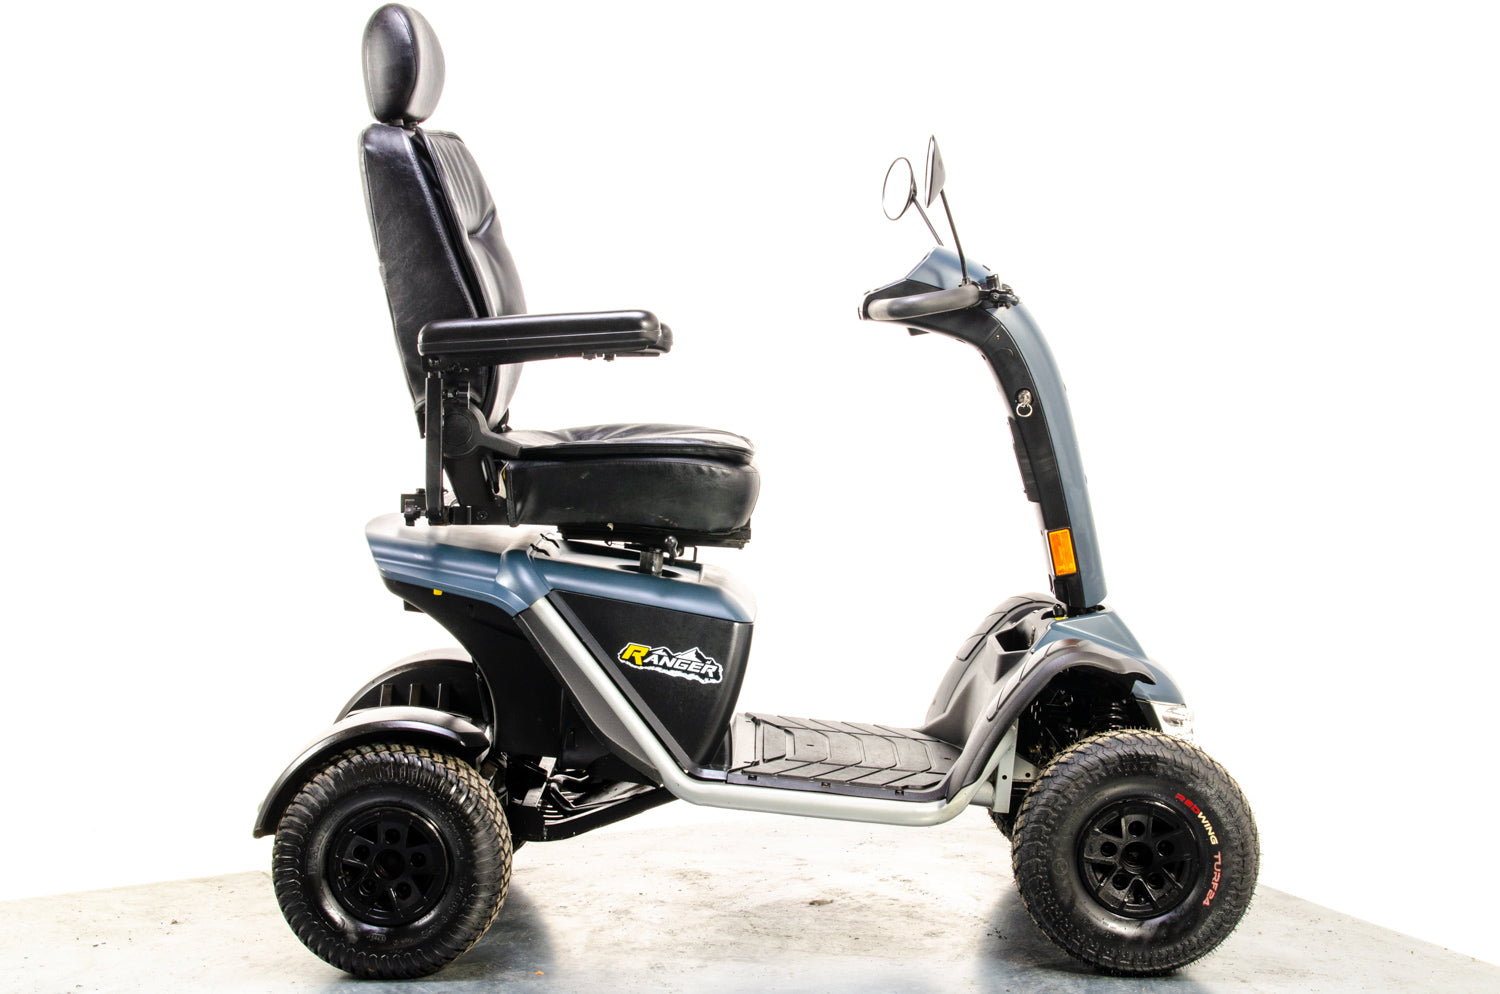 Pride Ranger Used Mobility Scooter Dual Motor 8mph Off-Road All-Terrain Road Pavement Class 3